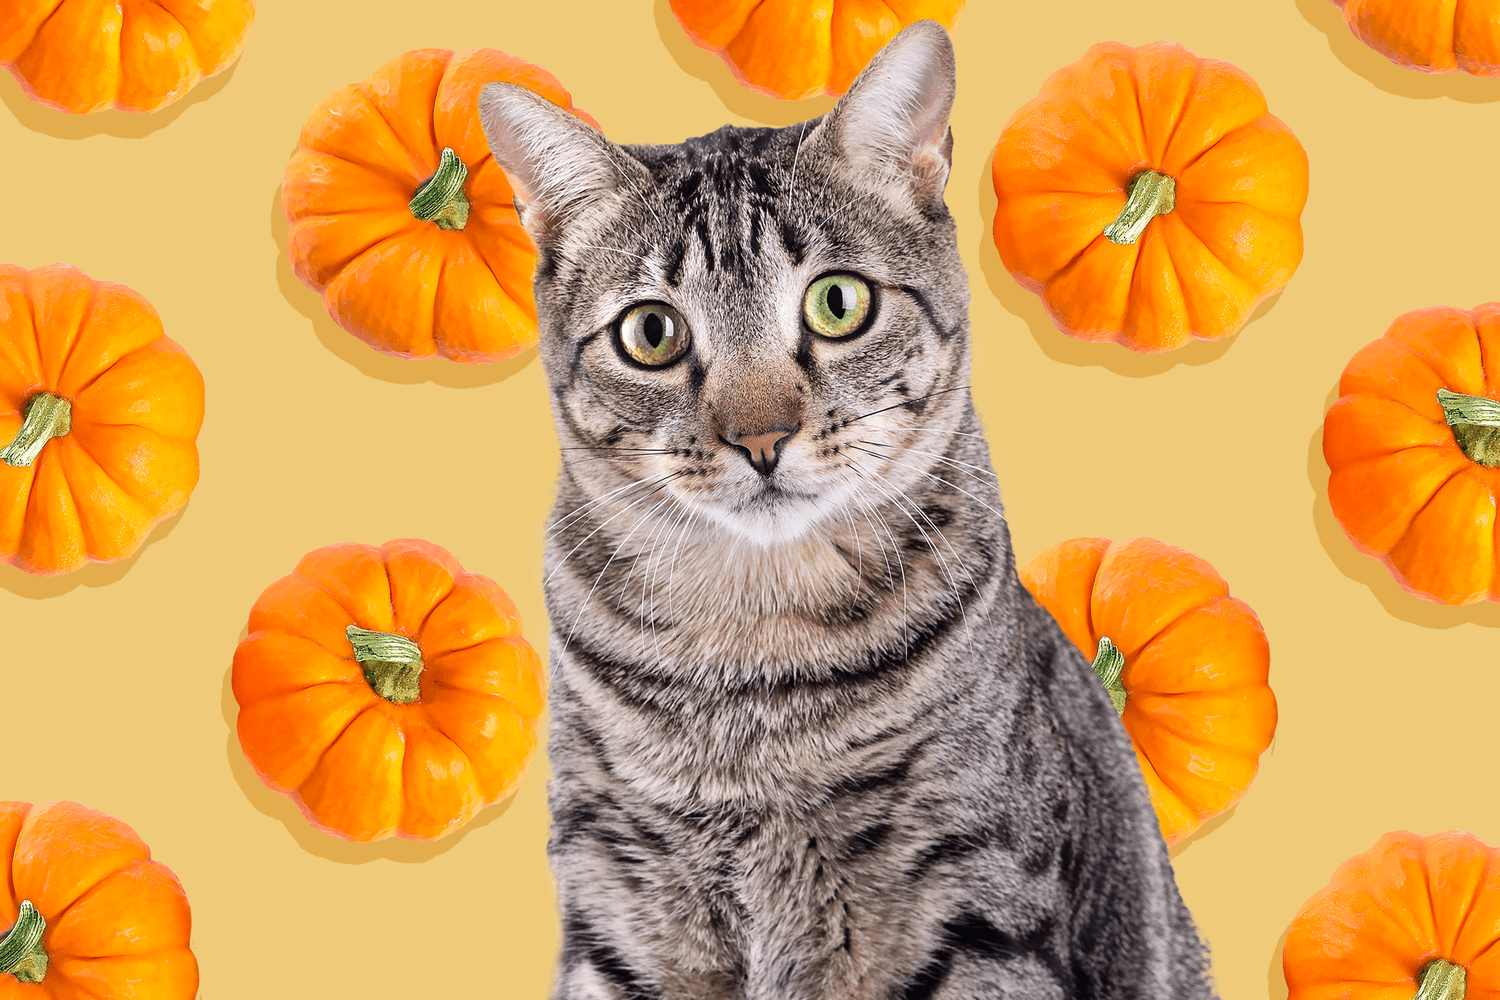 cat with a background pattern of pumpkins; can cats eat pumpkins?